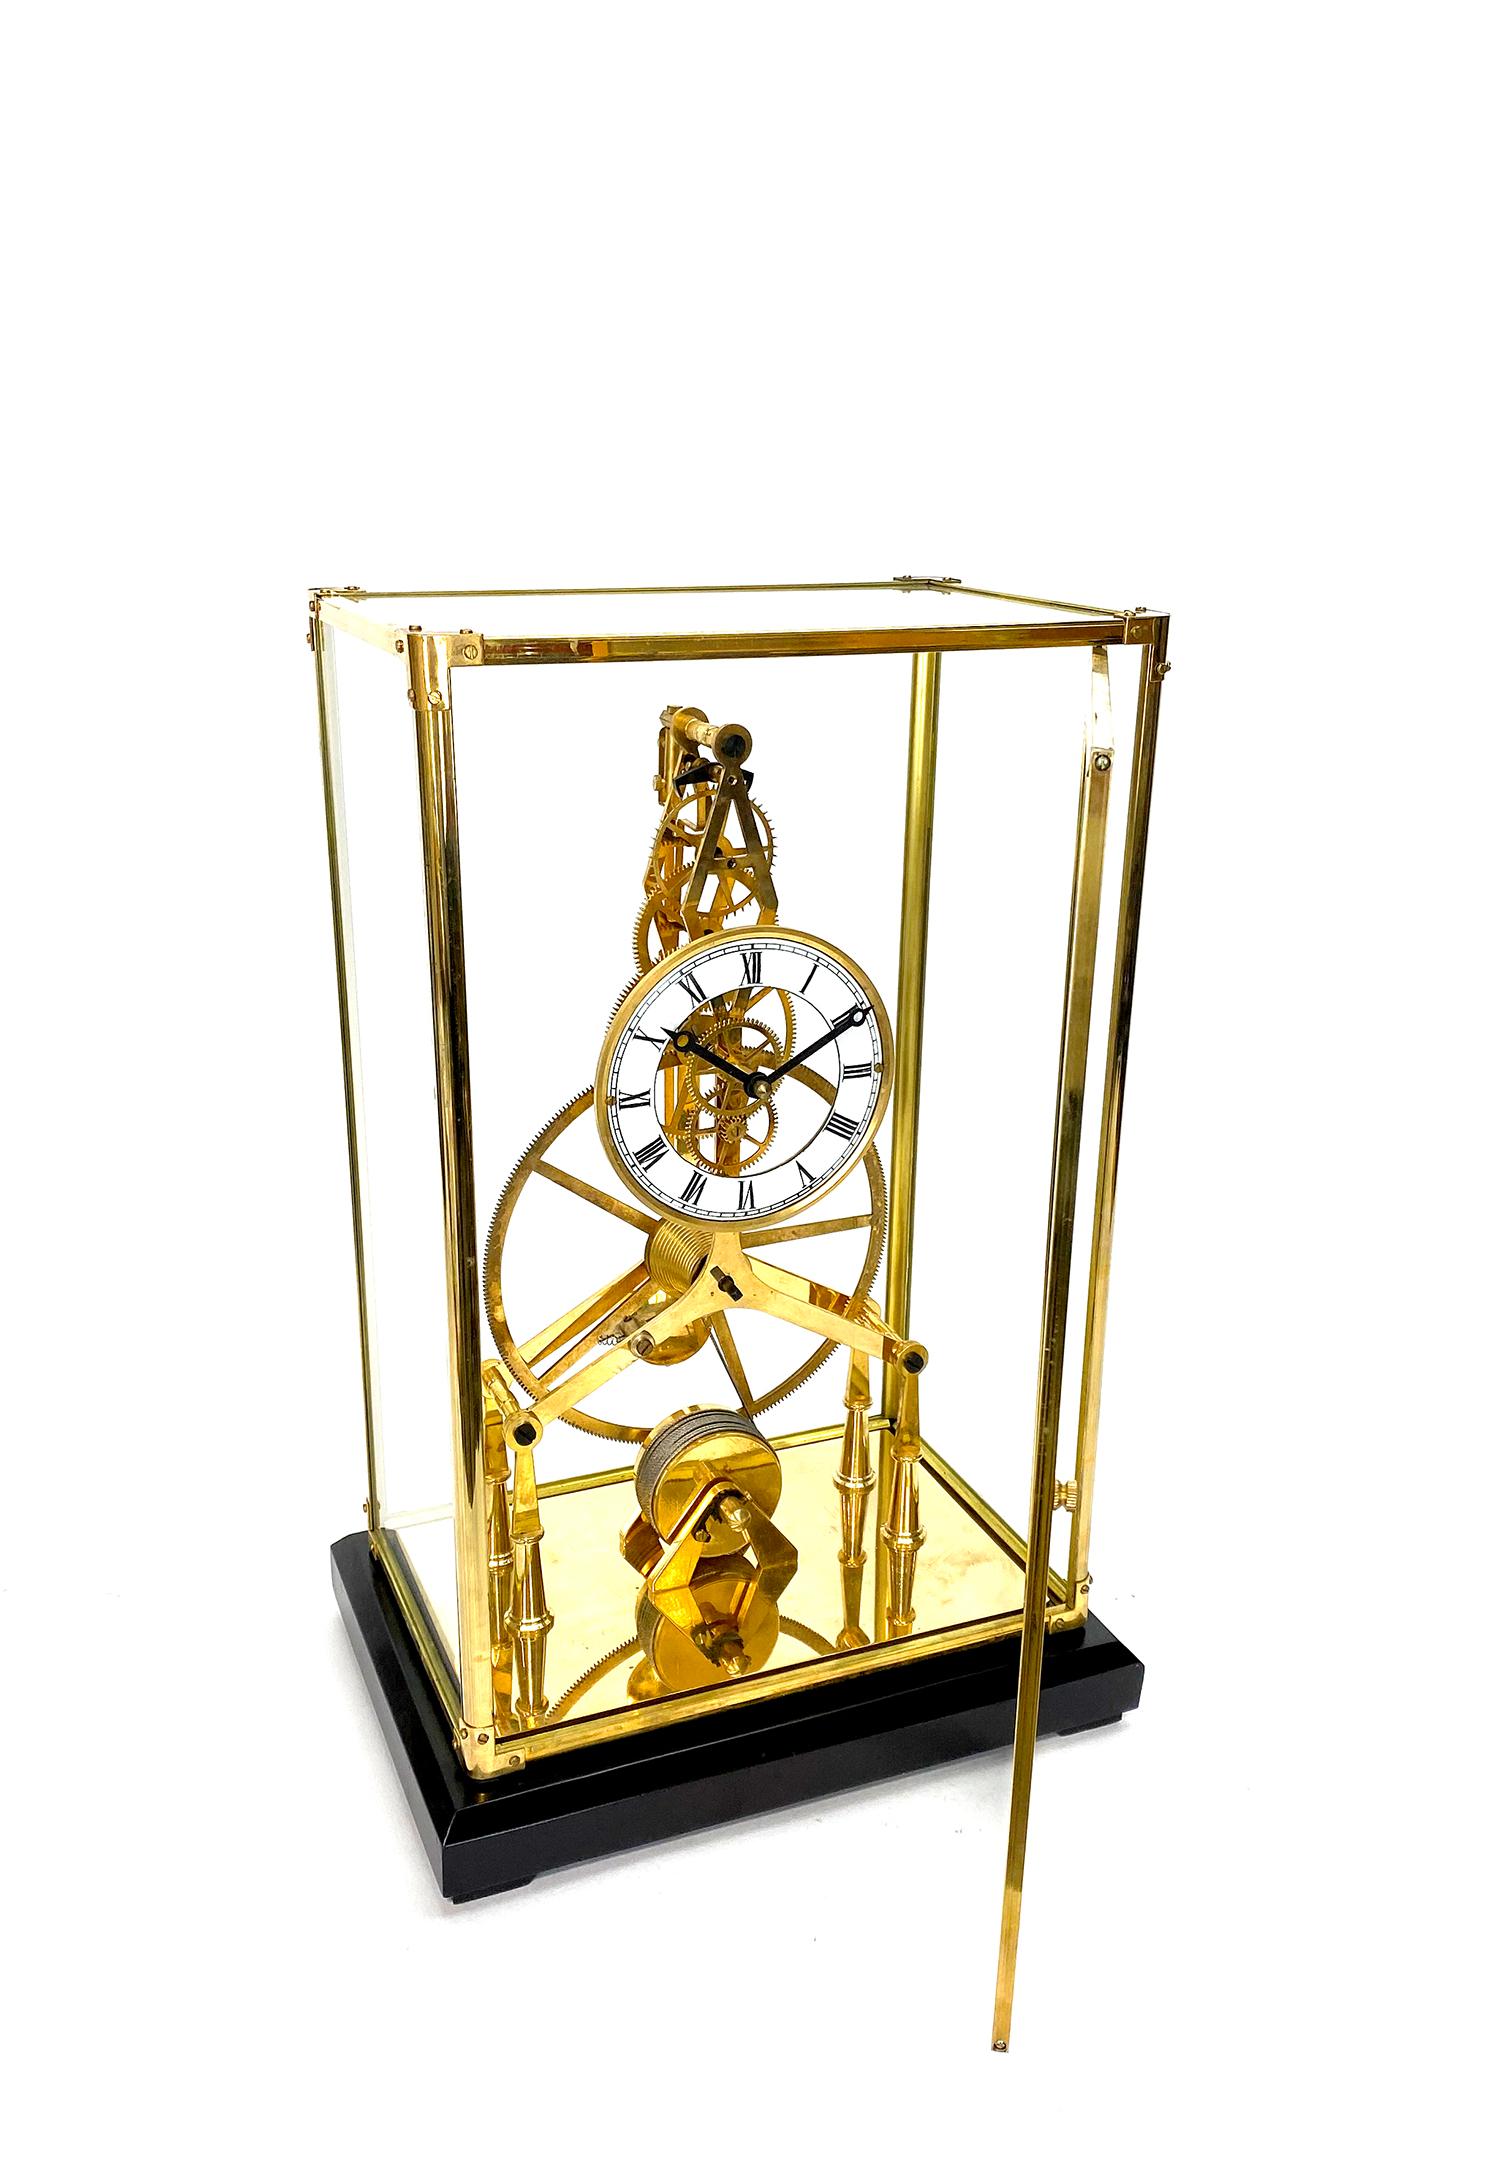 24K Gold Plated 8 Day Great Wheel Fusee Driven Porcelain Dial Skeleton Clock

Here is a very nice looking 24K plated large skeleton clock, housed inside a brass frame glass case. It has a front opening door, so you can easily set and wind the clock.